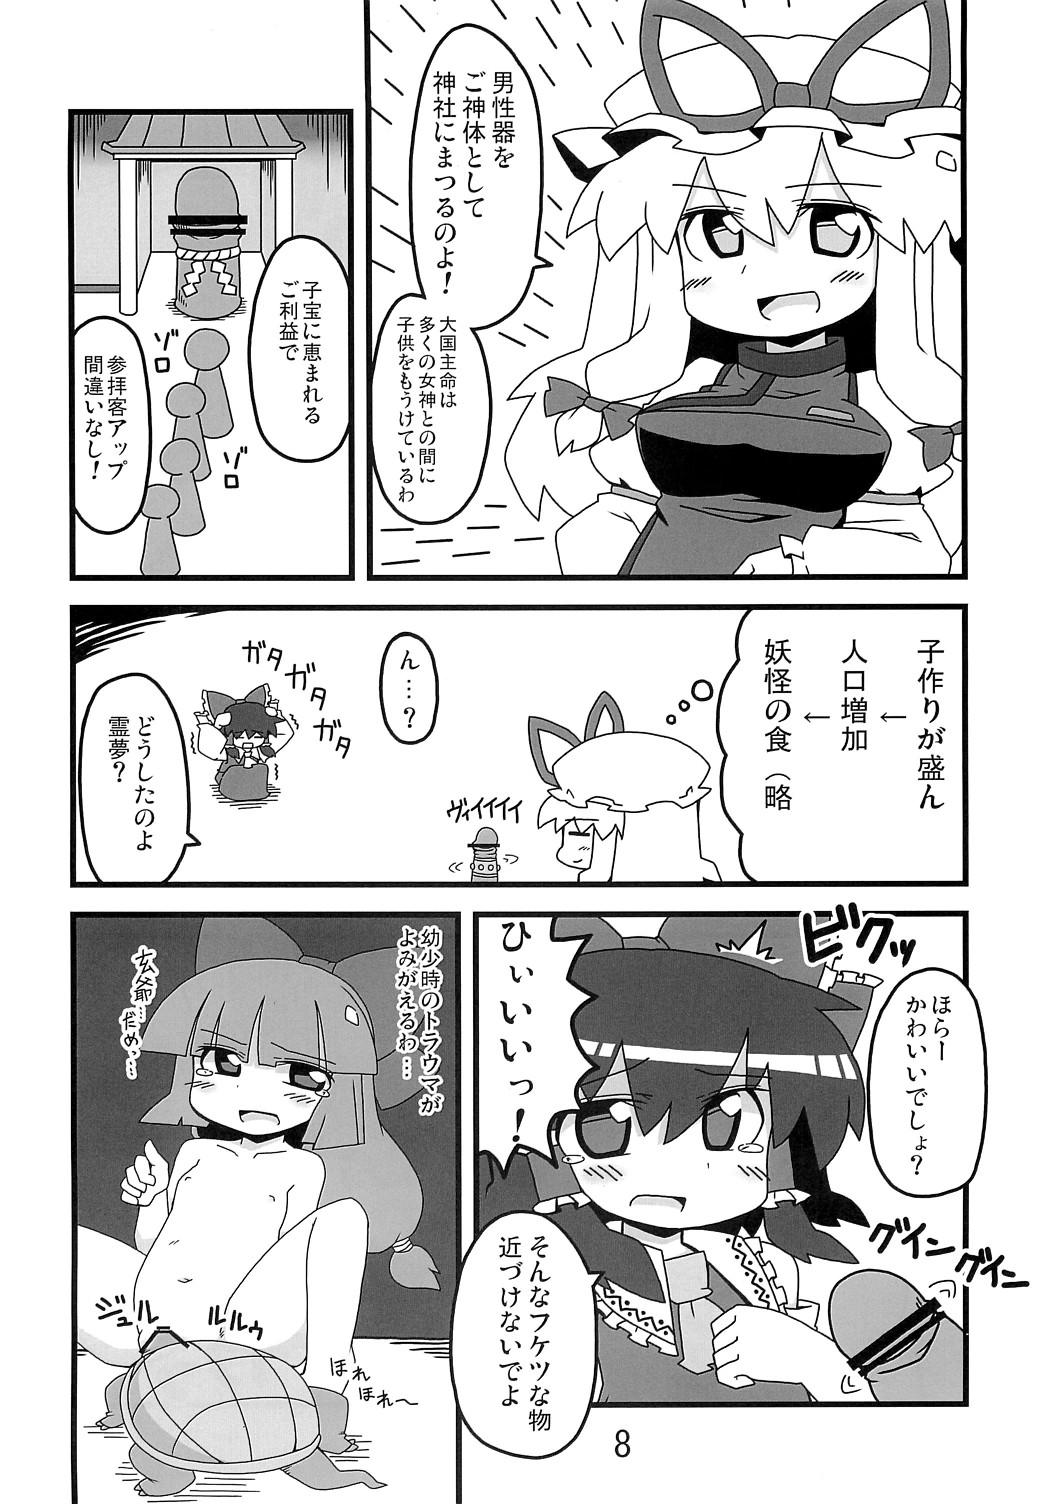 Game 東方豊年祭 - Touhou project Naija - Page 7